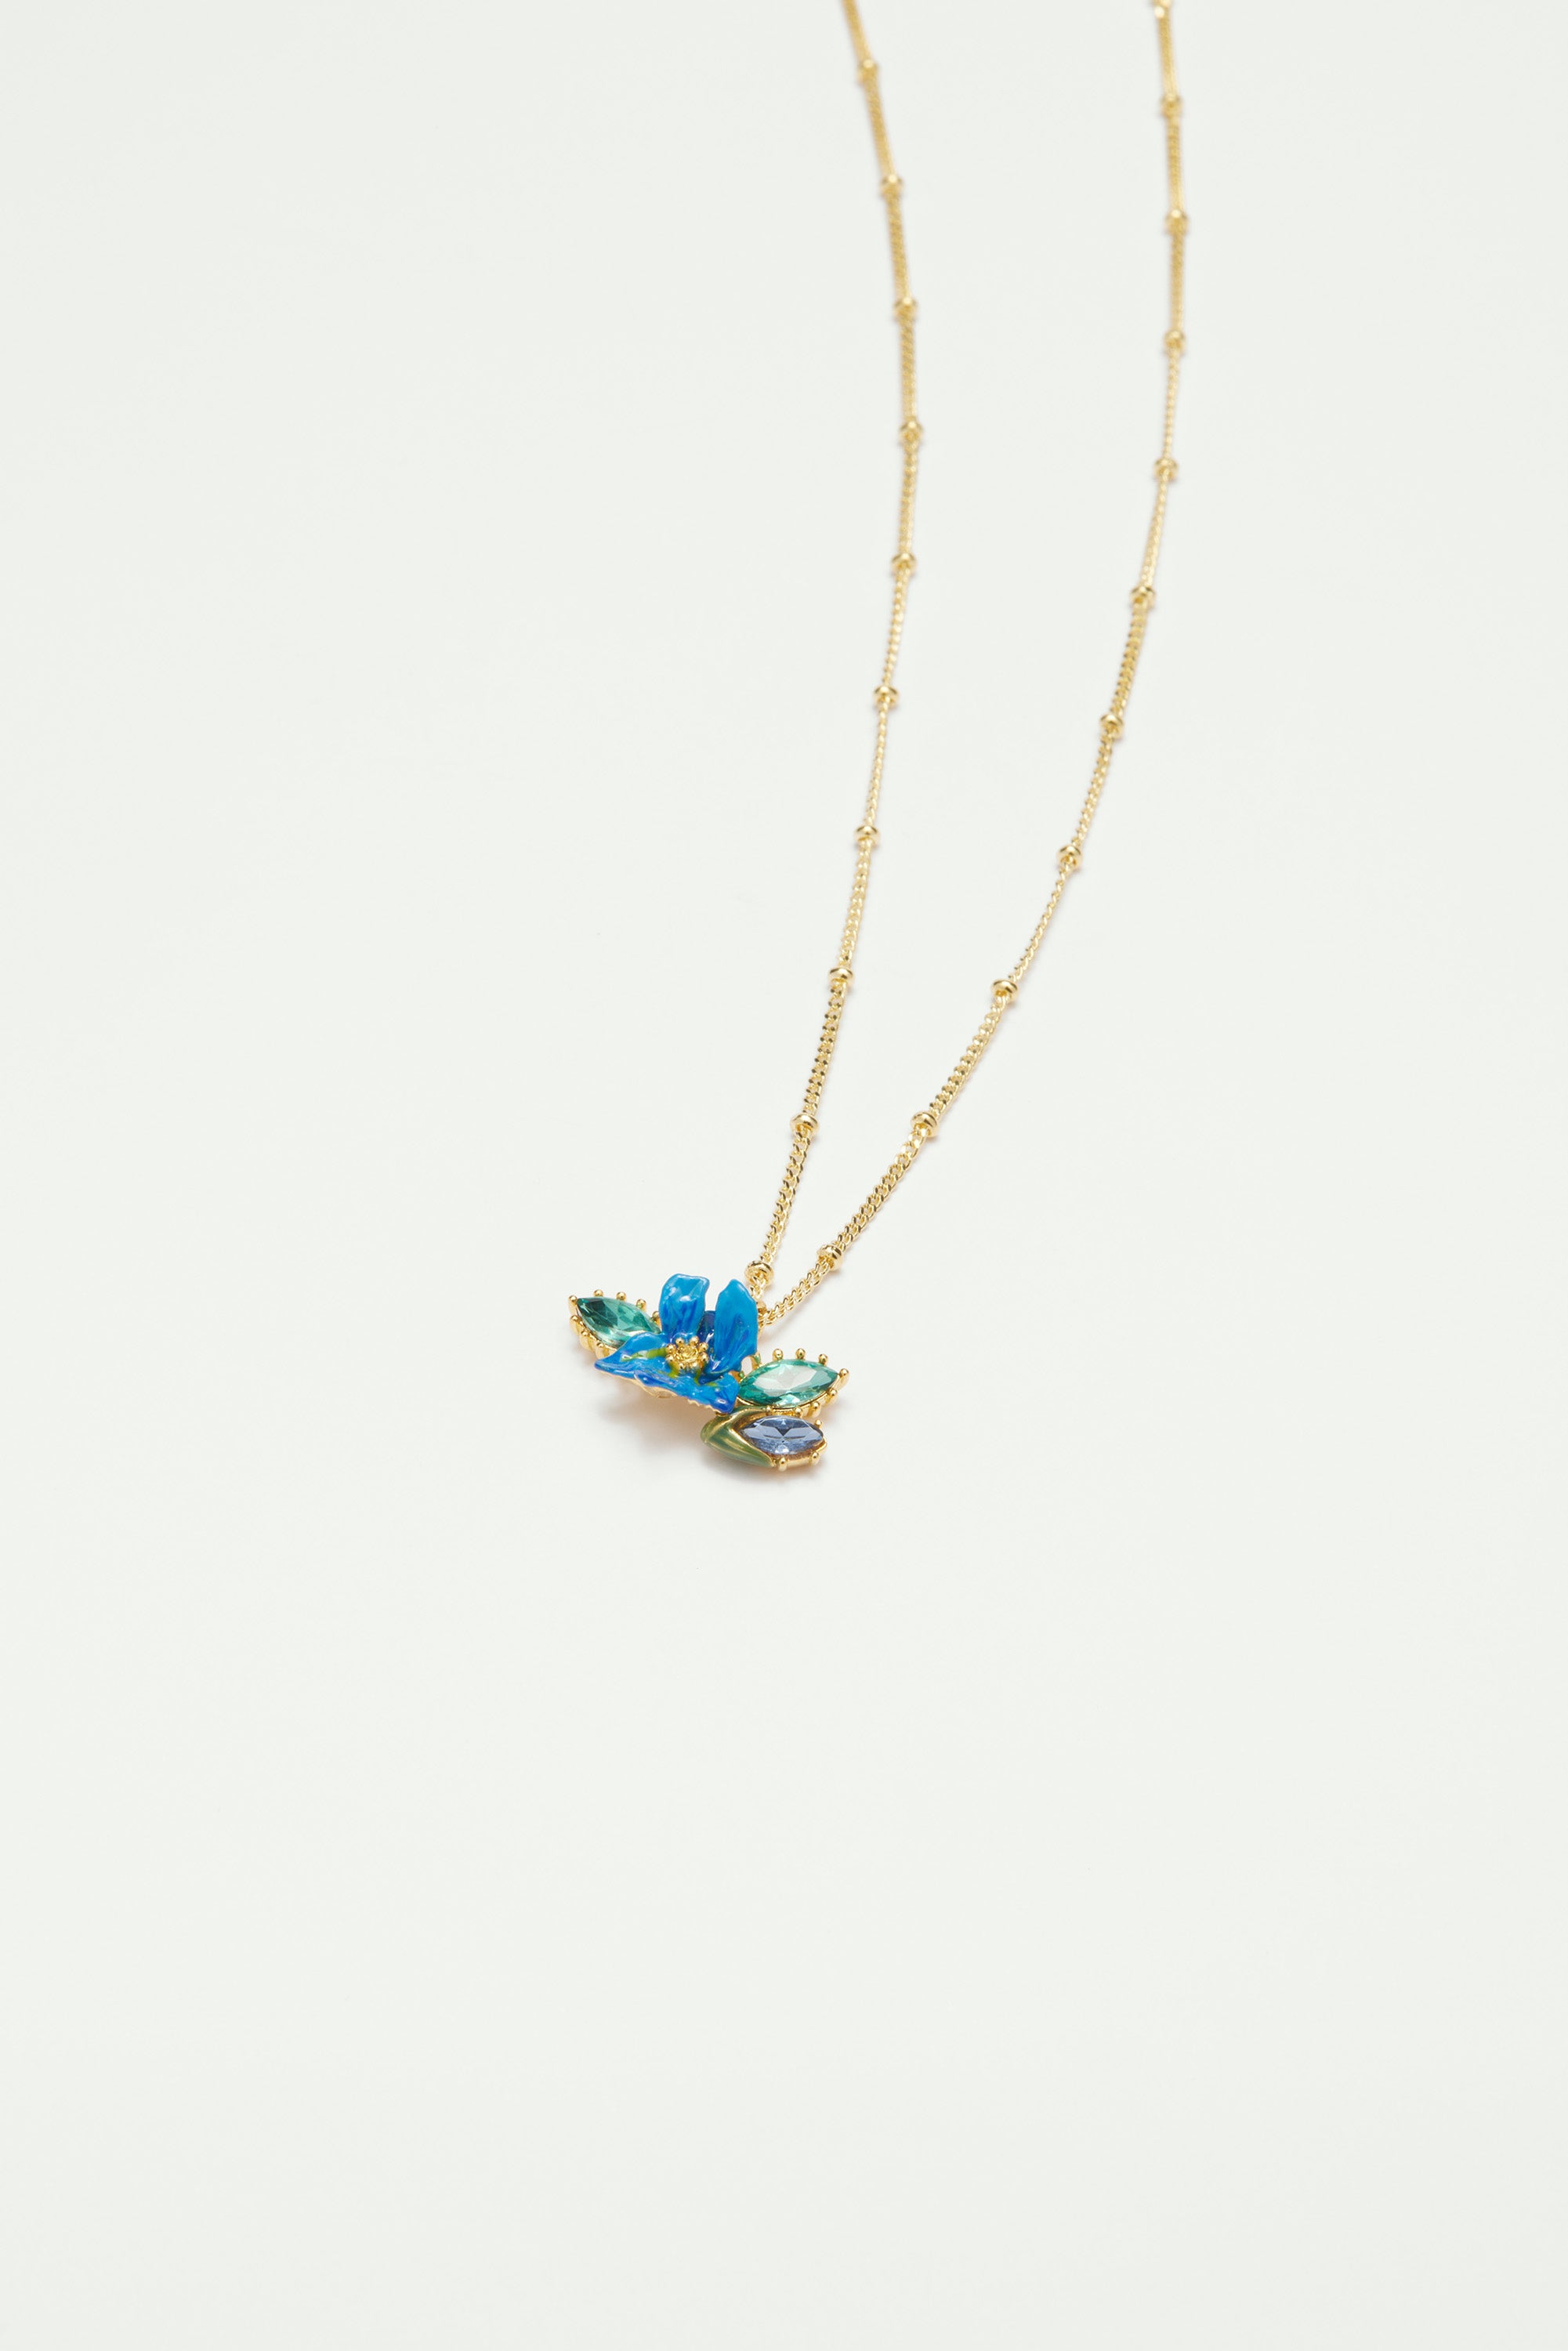 Siberian iris and faceted glass pendant necklace